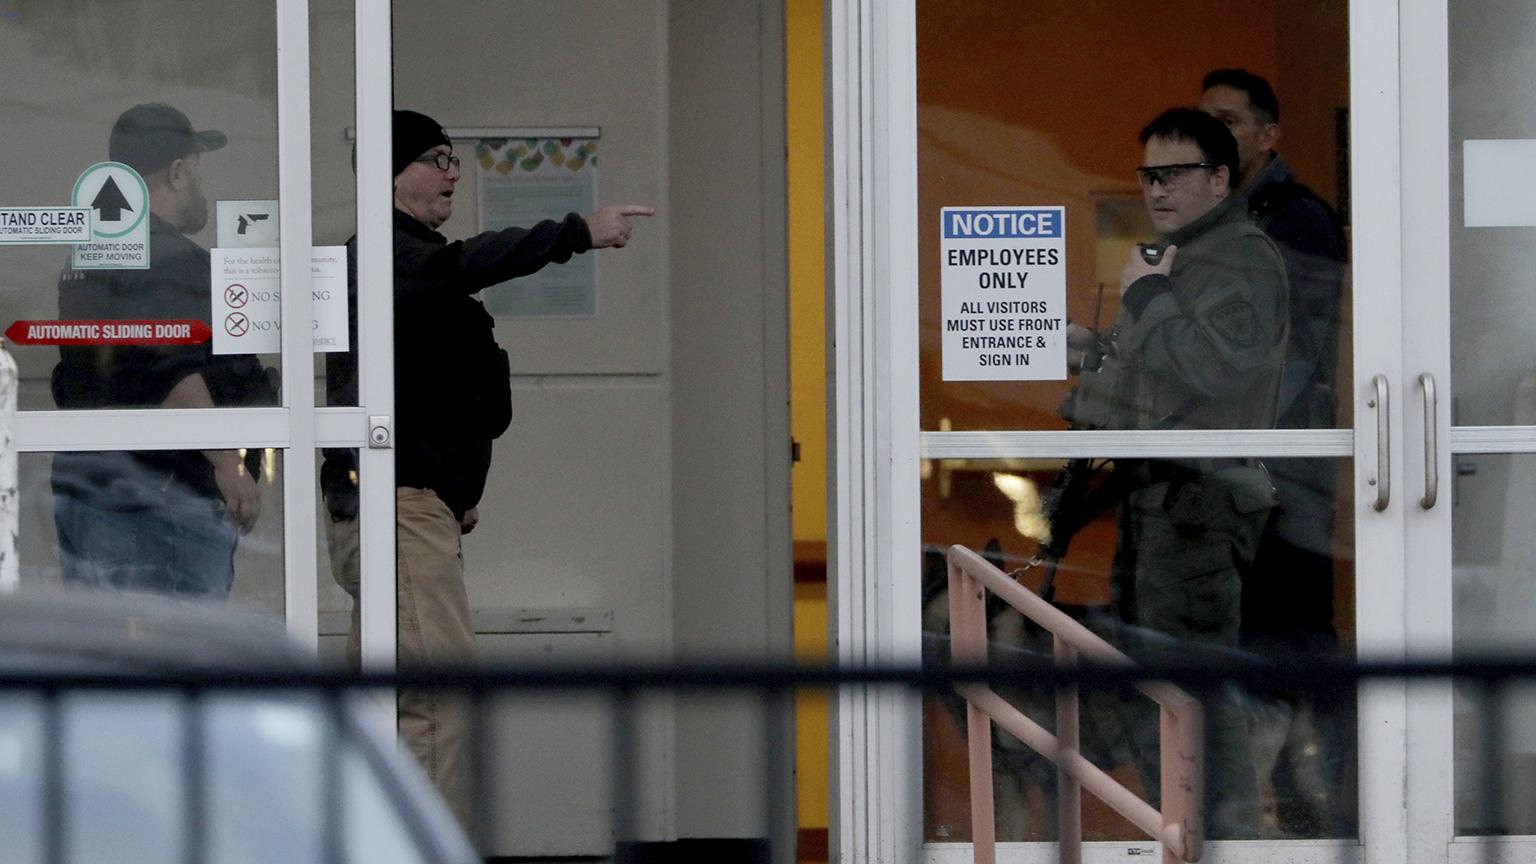 Law enforcement officers including Chicago SWAT work an entrance at Mercy Hospital on Monday, Nov. 19, 2018, in Chicago. (Zbigniew Bzdak / Chicago Tribune via AP)